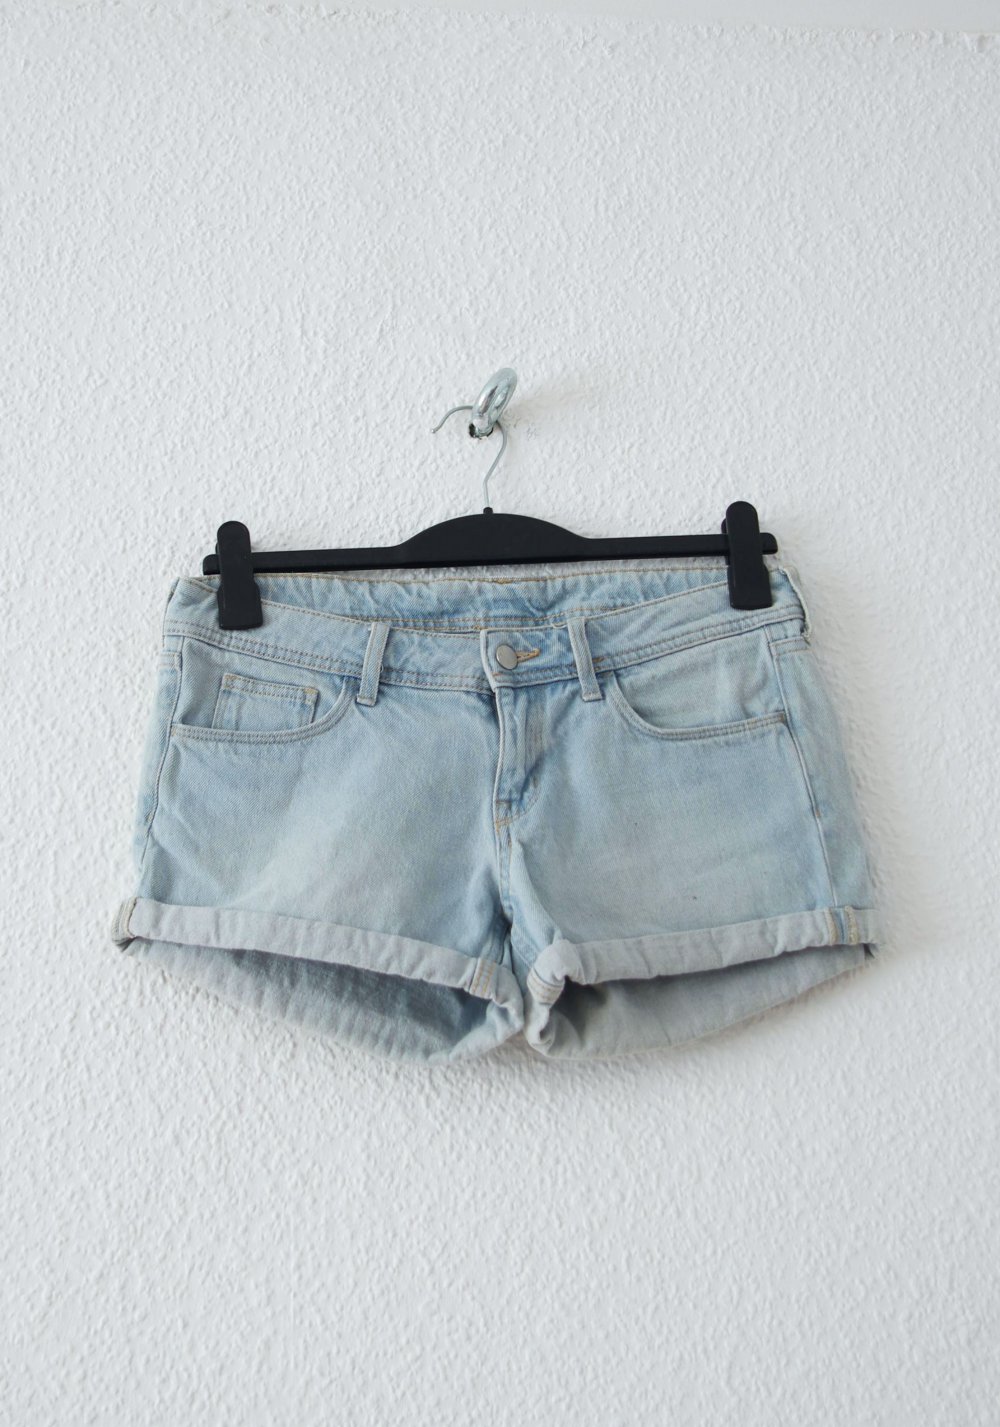 High waisted Shorts and backless top